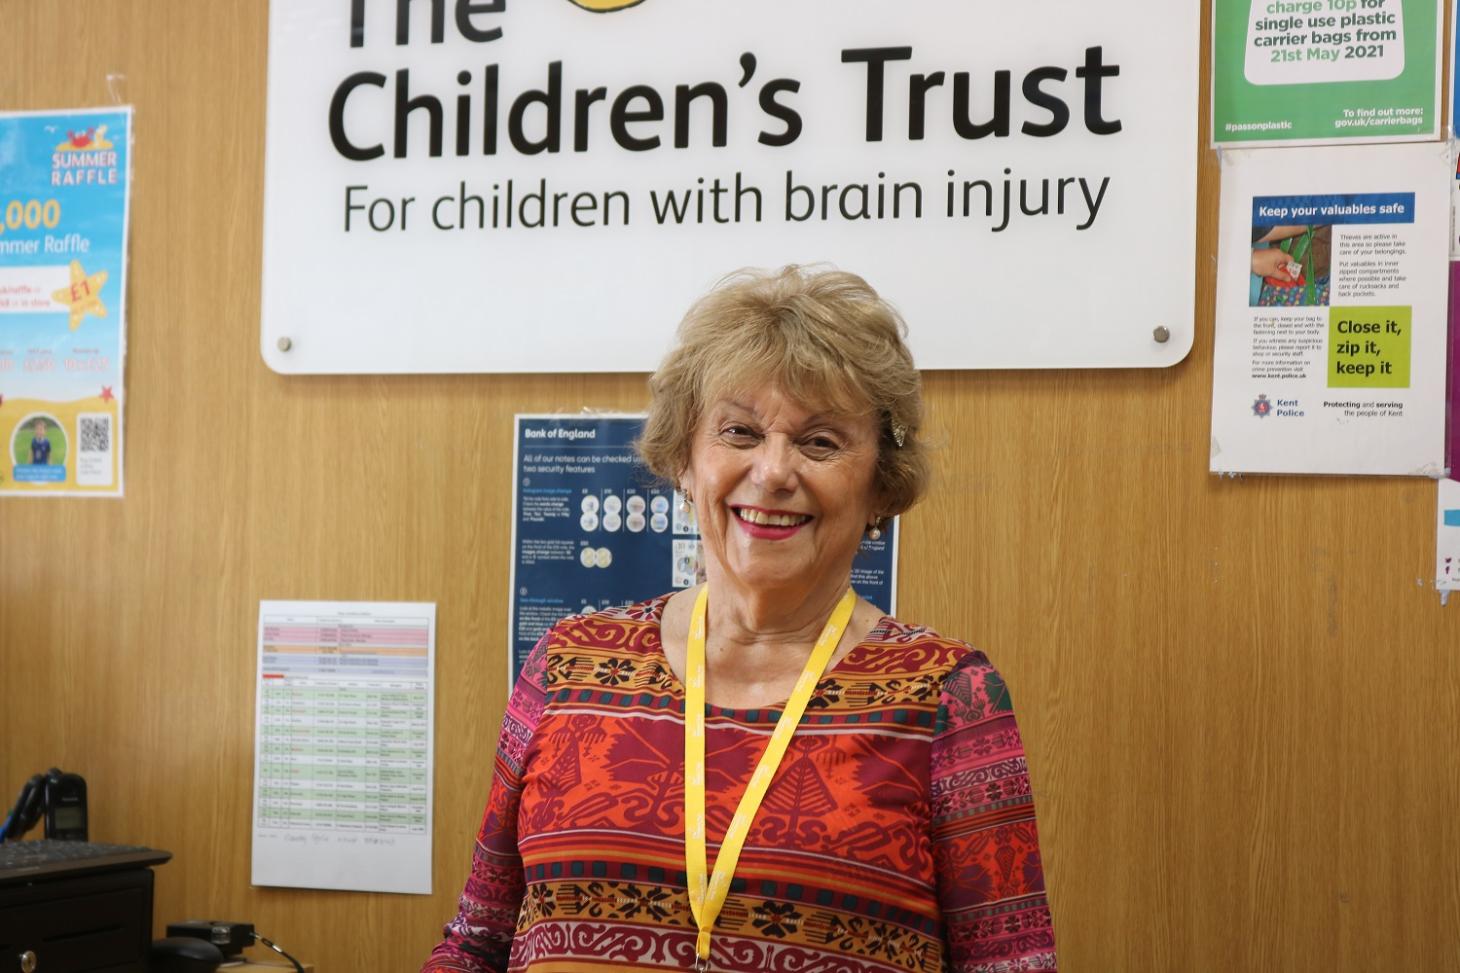 Pauline stands behind the till at The Children's Trust charity shop